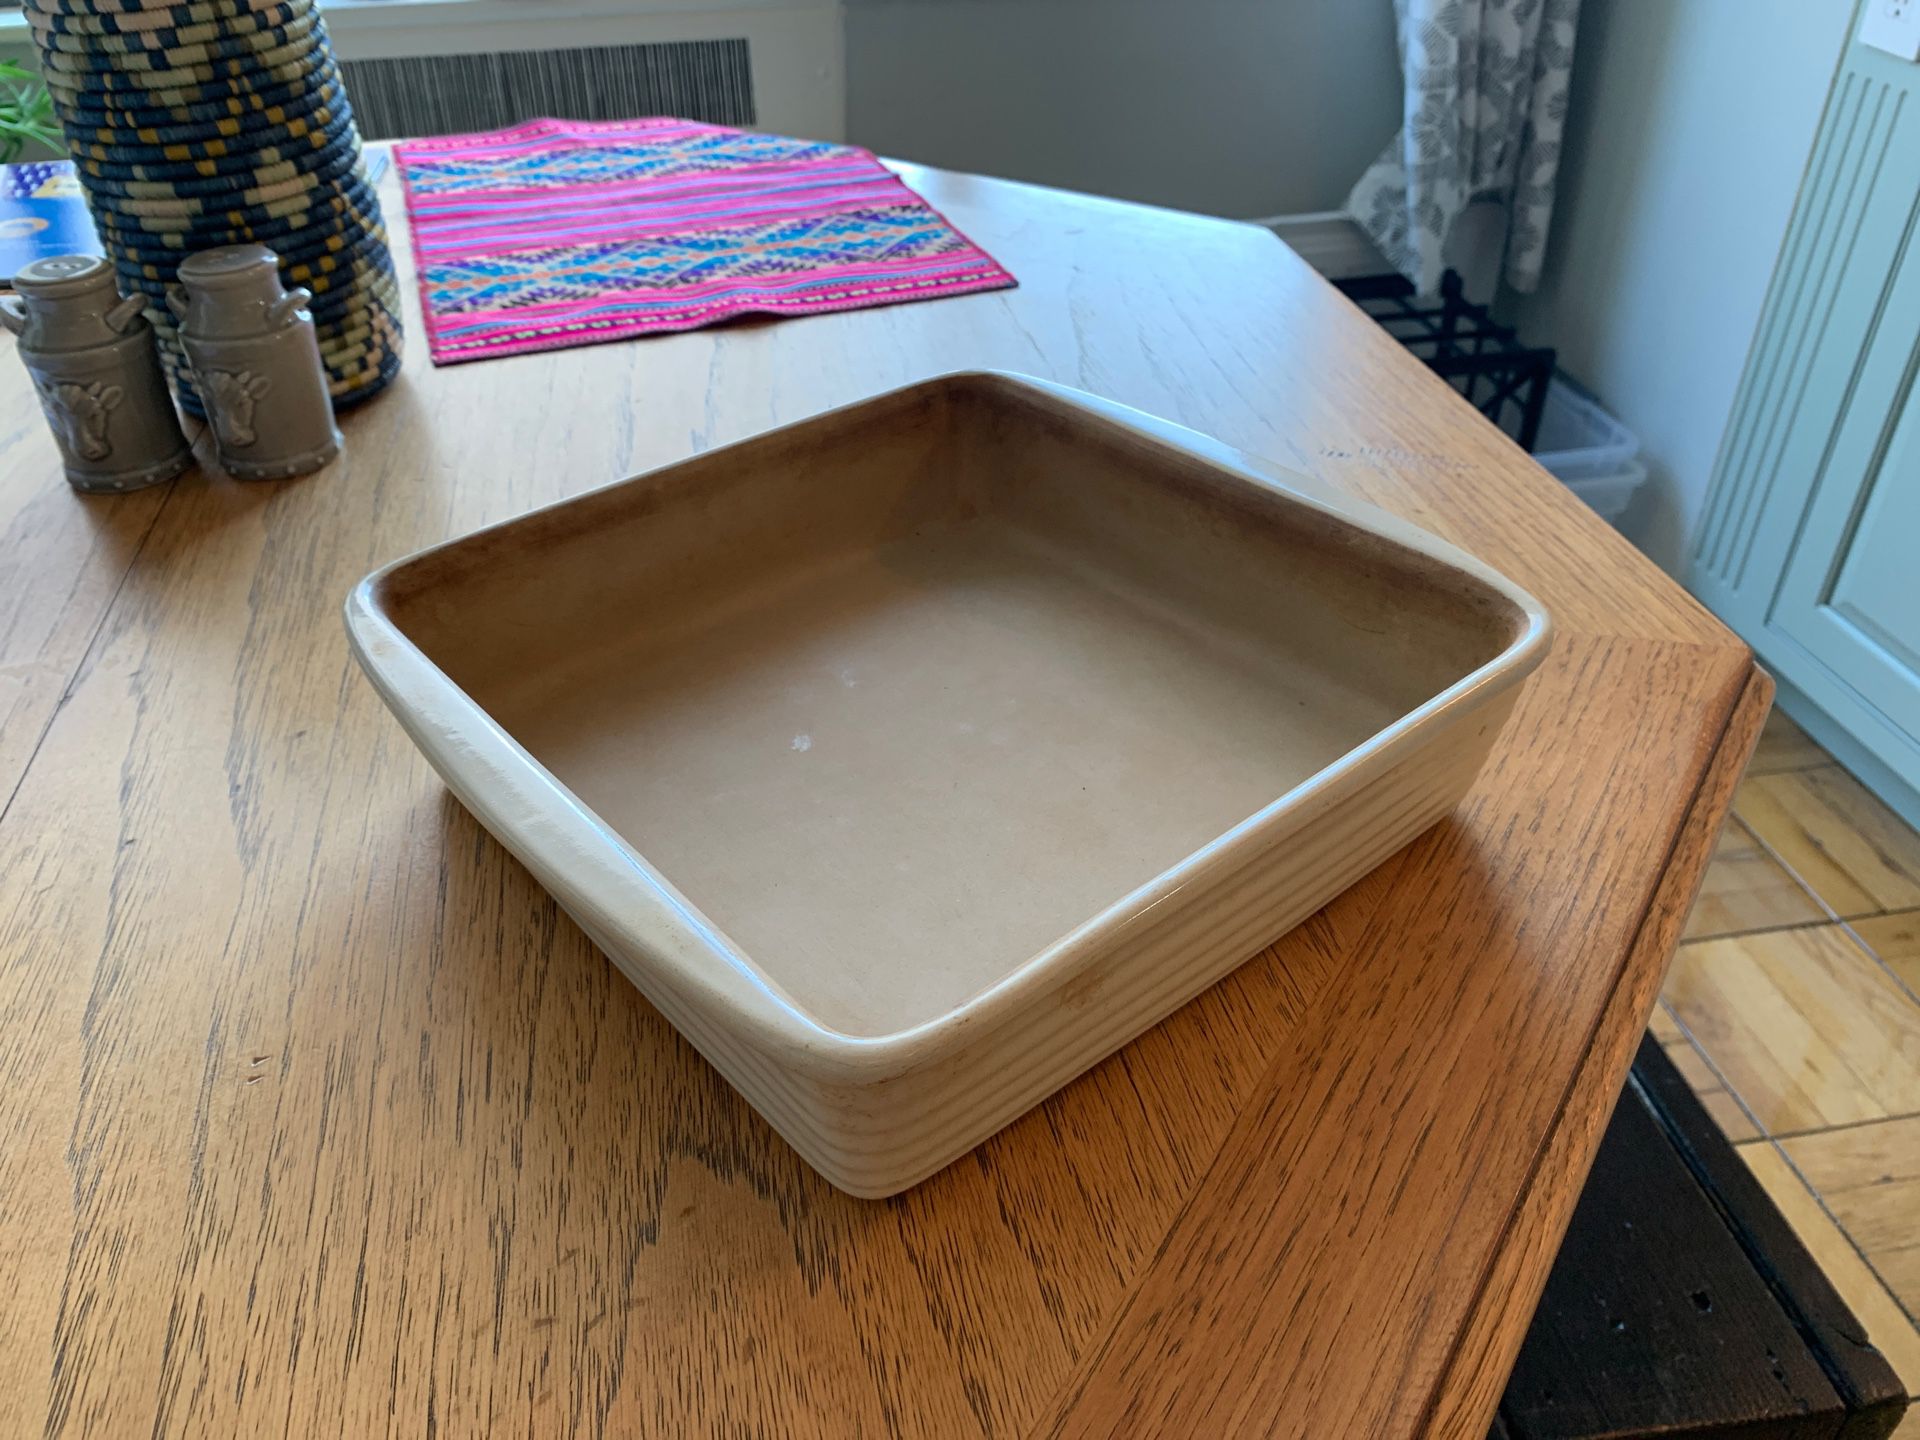 8” by 8” Pampered Chef Stone Pan